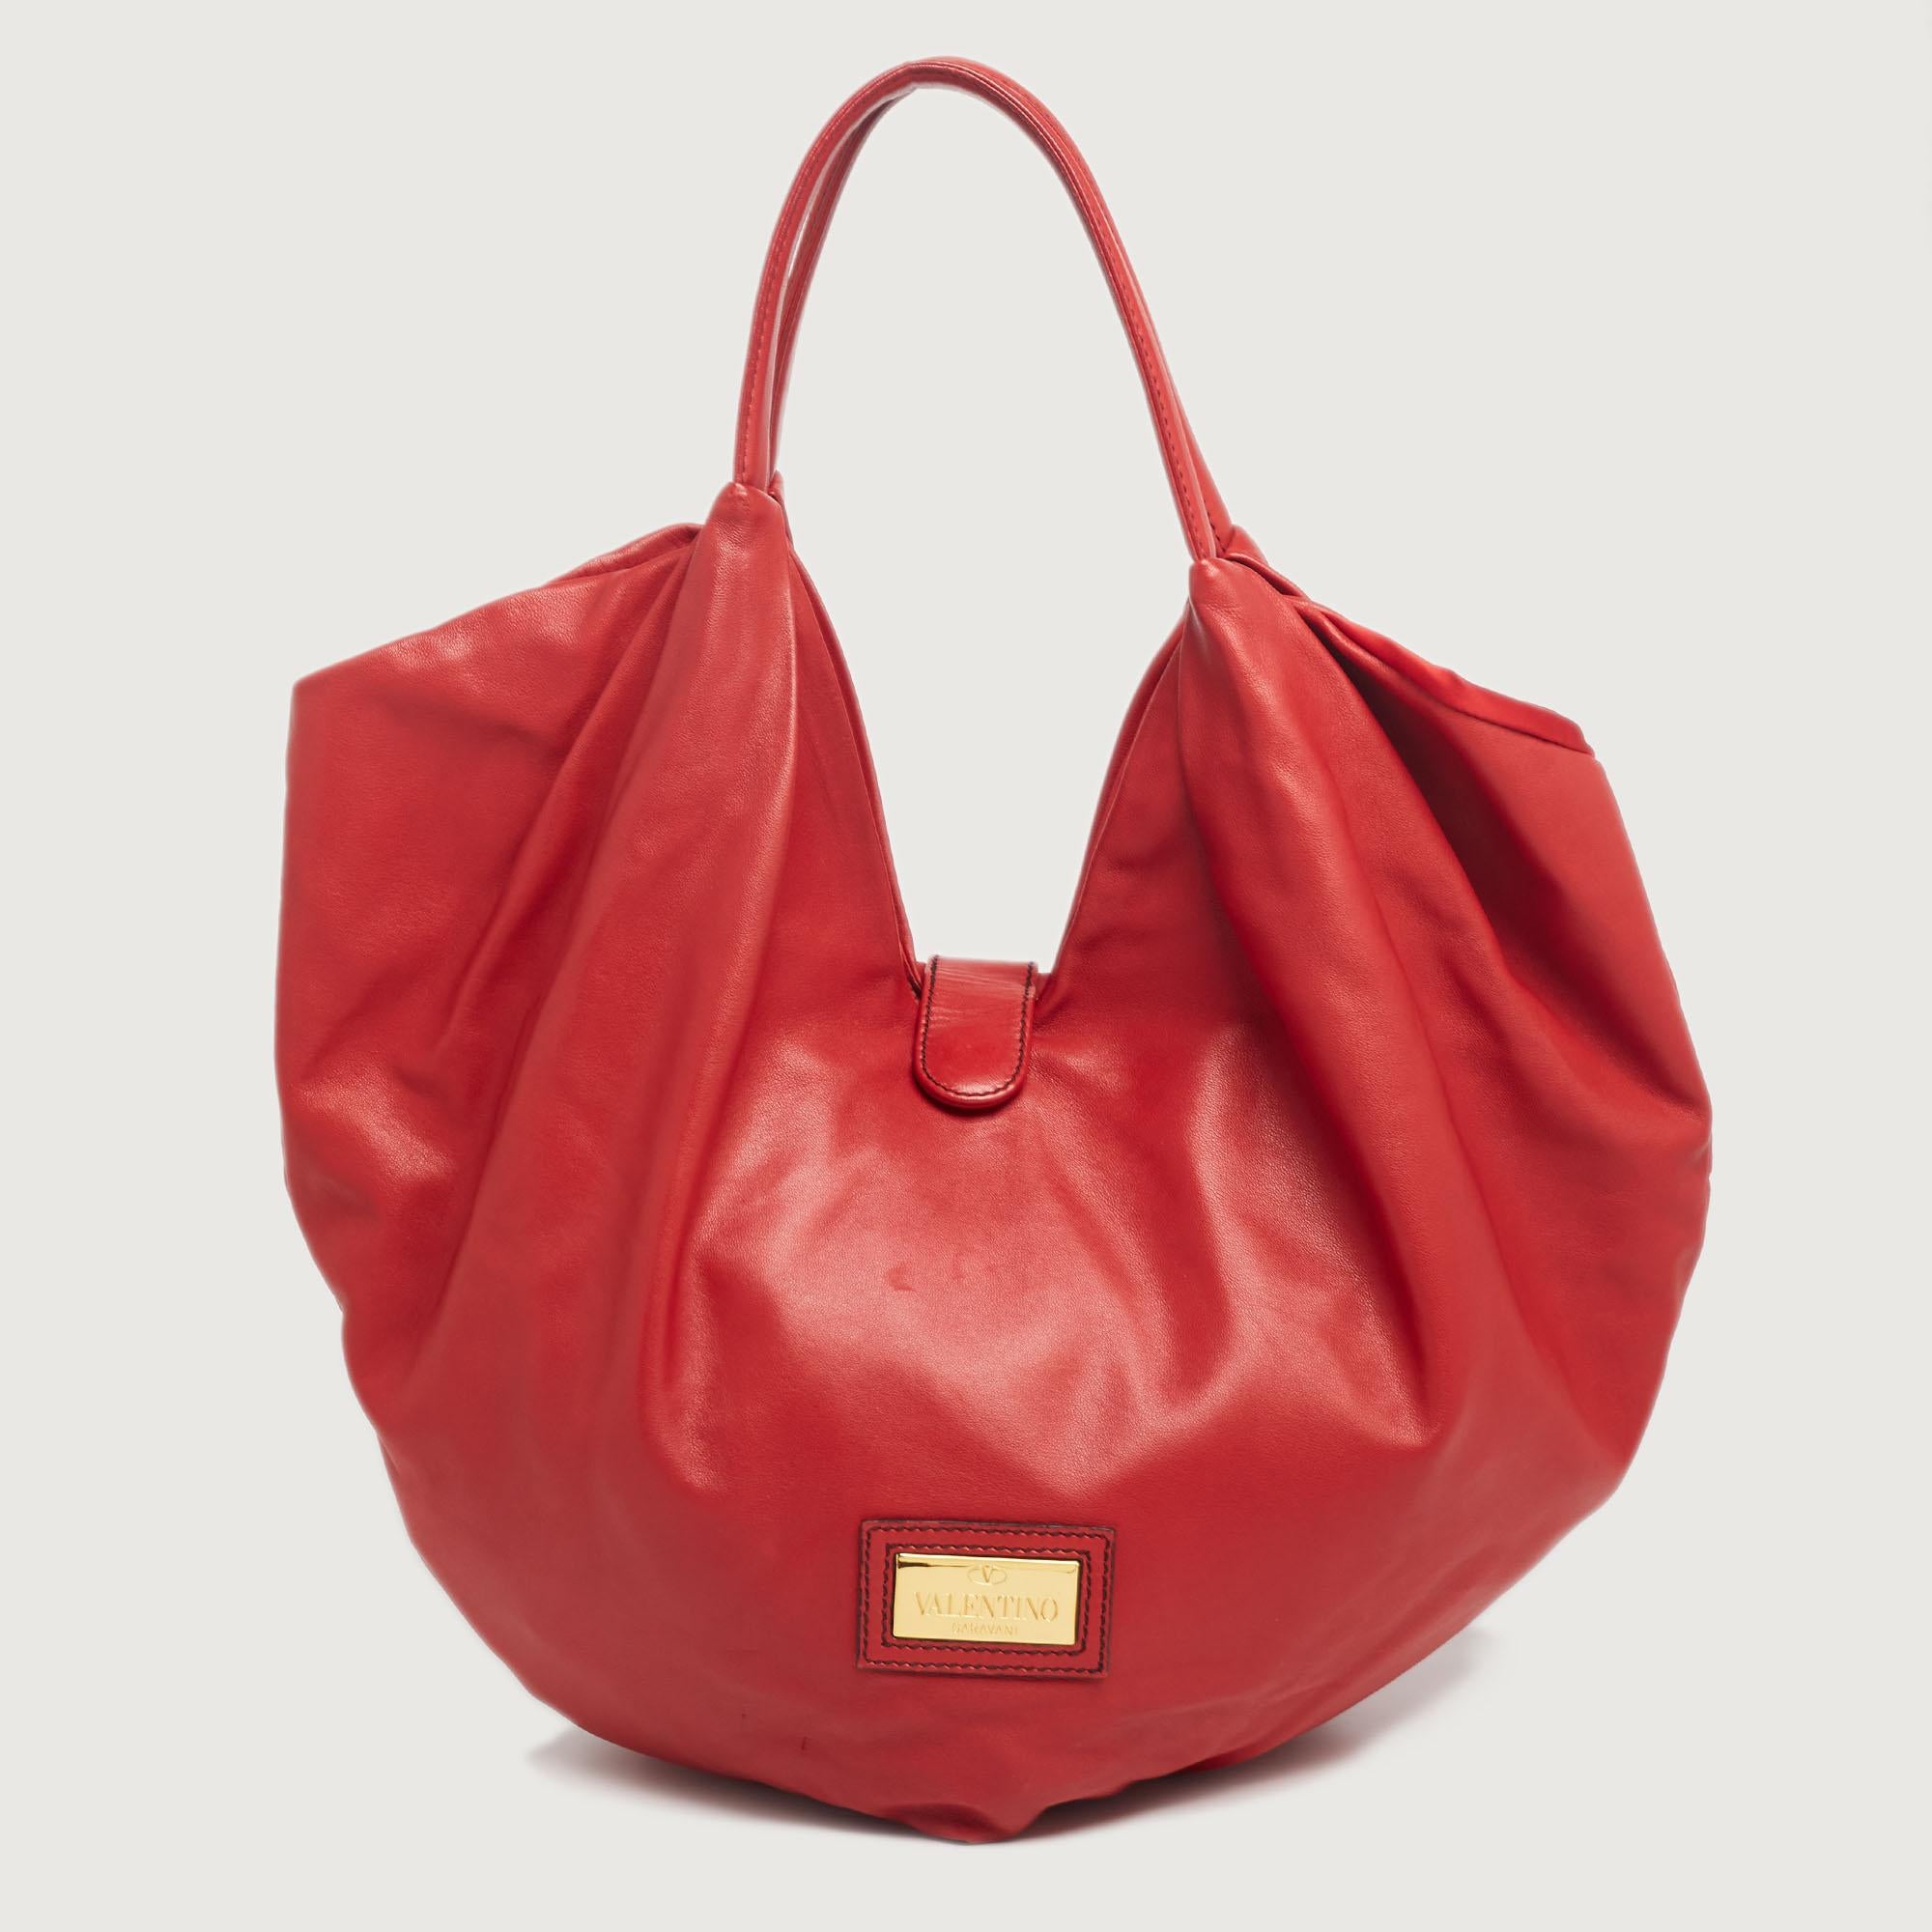 A large bow on the front is the highlight of this Valentino 360 Bow hobo. It is crafted using red leather and equipped with two handles and a spacious satin interior. This eye-catching bag will add a chic finish to your favorite looks.

Includes: